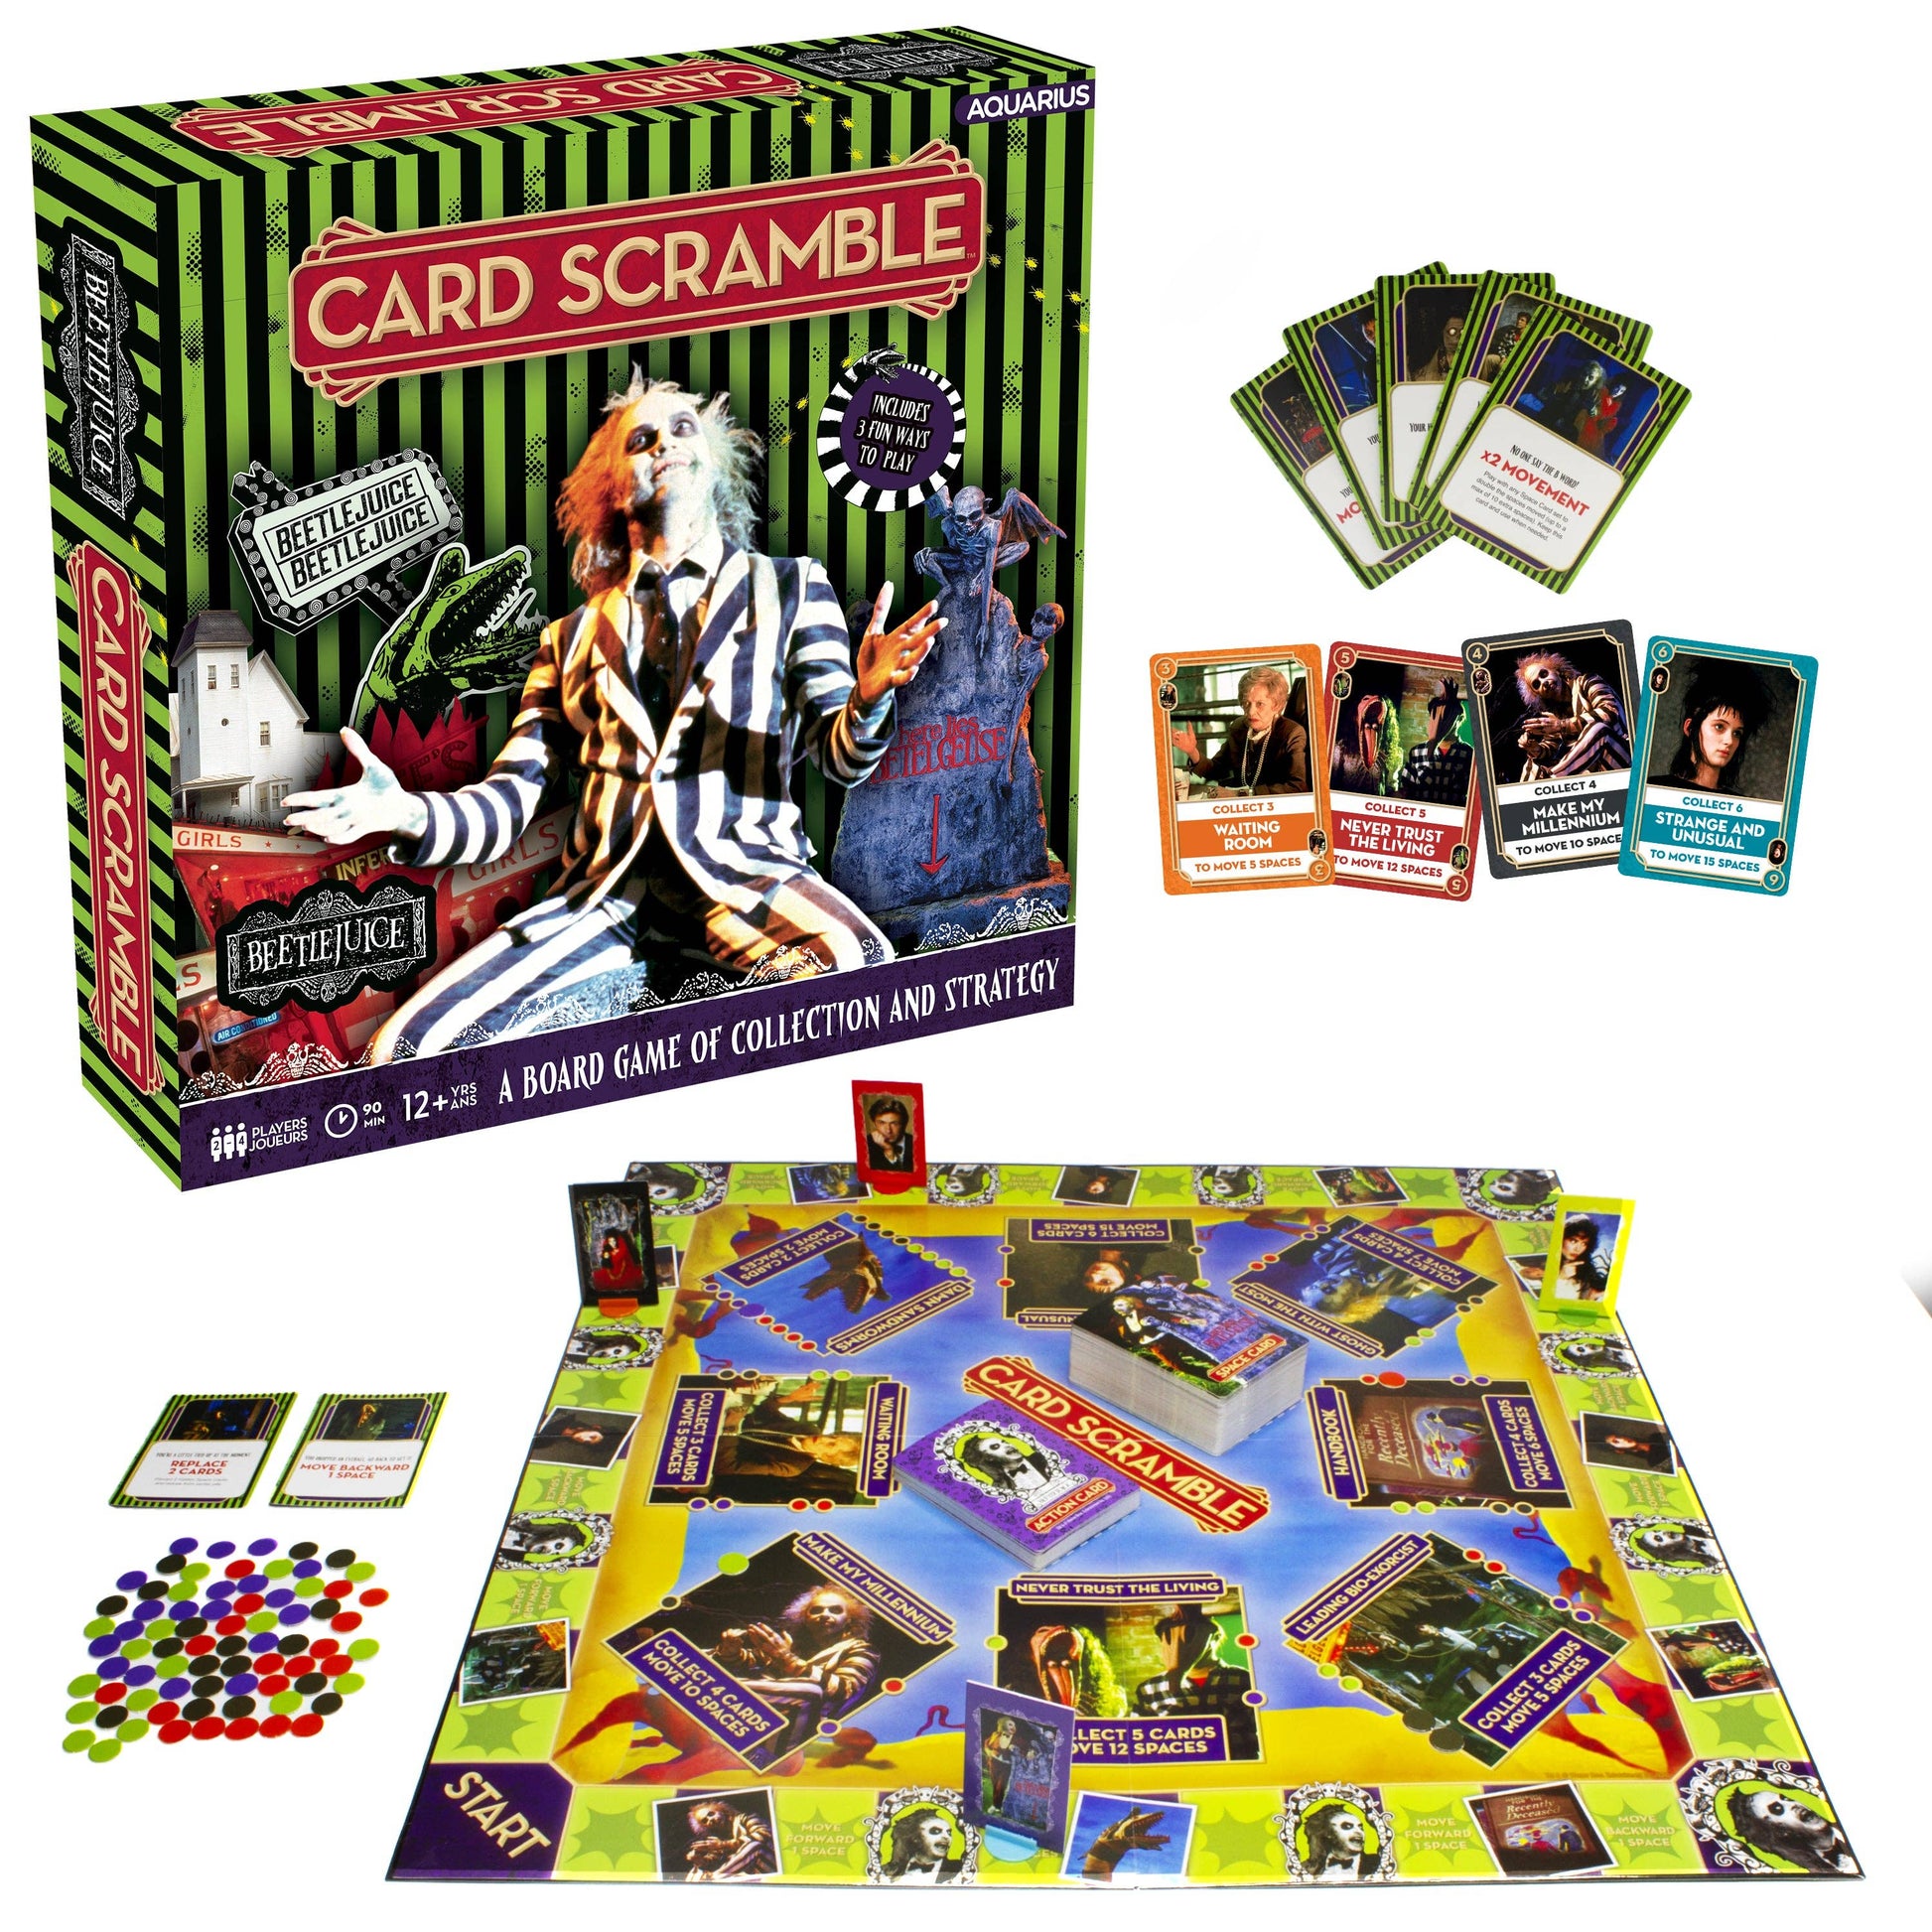 Enjoy Beetlejuice-themed board game fun with friends and family! Includes game board, 3 gameplay options, 4 character pieces, 32 action cards, 96 space cards and 80 scoring pieces. For 2-4 players, ages 12+. Perfect for family game nights, Secret Santa and White Elephant. Officially licensed Beetlejuice movie merchandise - the perfect collectible item